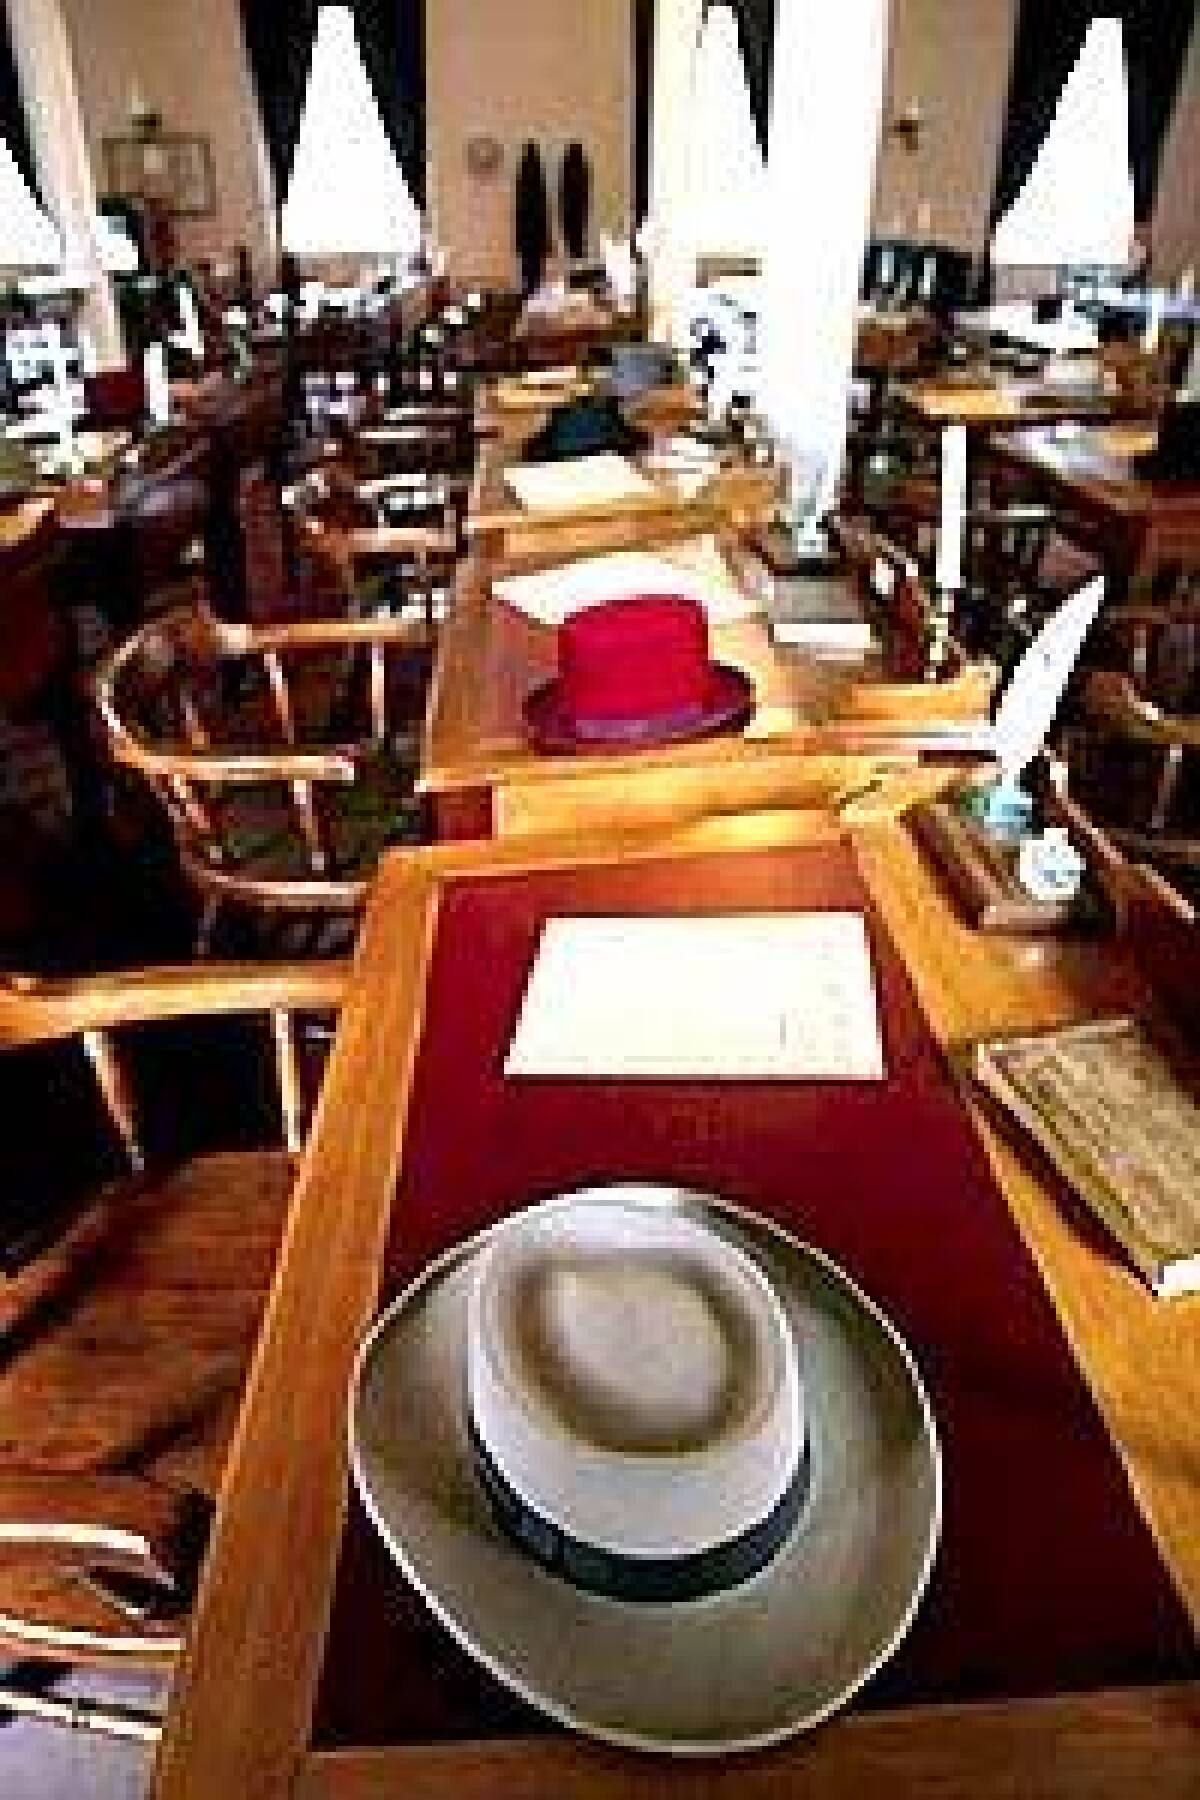 At Benicia Capitol State Historic Park, the room where state legislators met in 1853 and 54 has been restored in detail, including hats and quill pens reflecting the period.